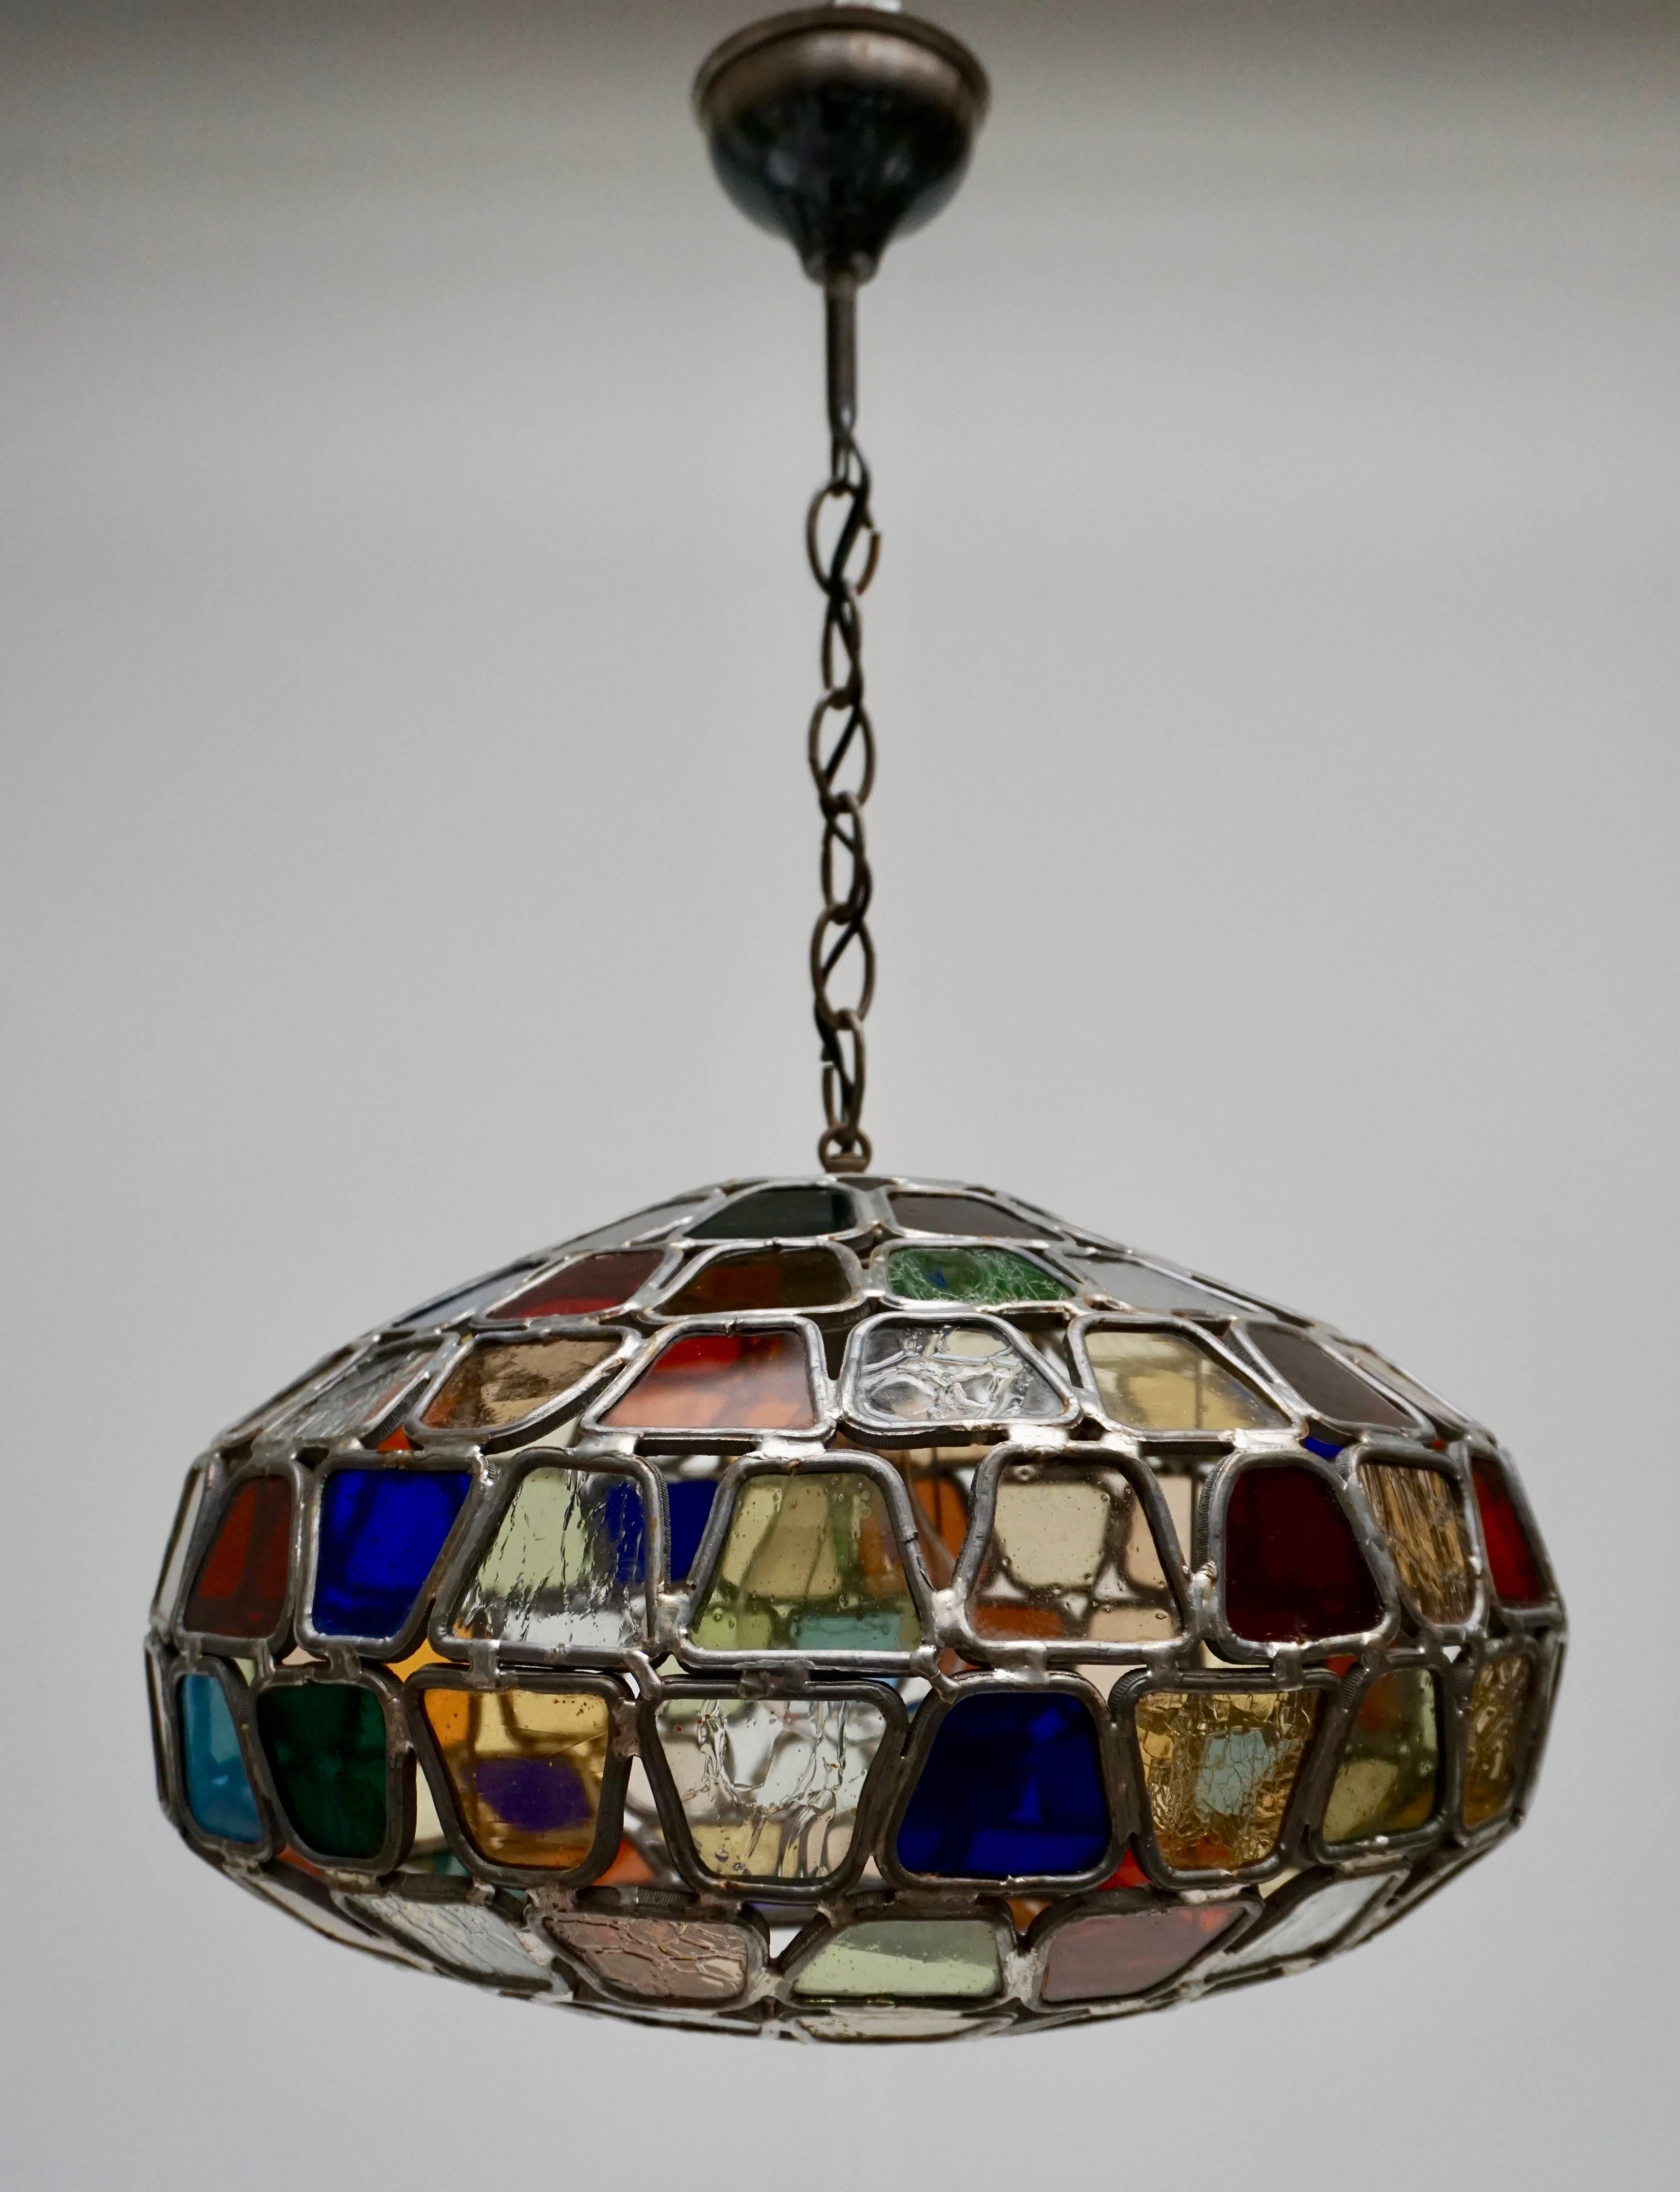 Colorful stained glass pendant with iron chain.
Diameter:40 cm.
Height fixture:20 cm.
Total height: 55 cm.
One E27 bulb.